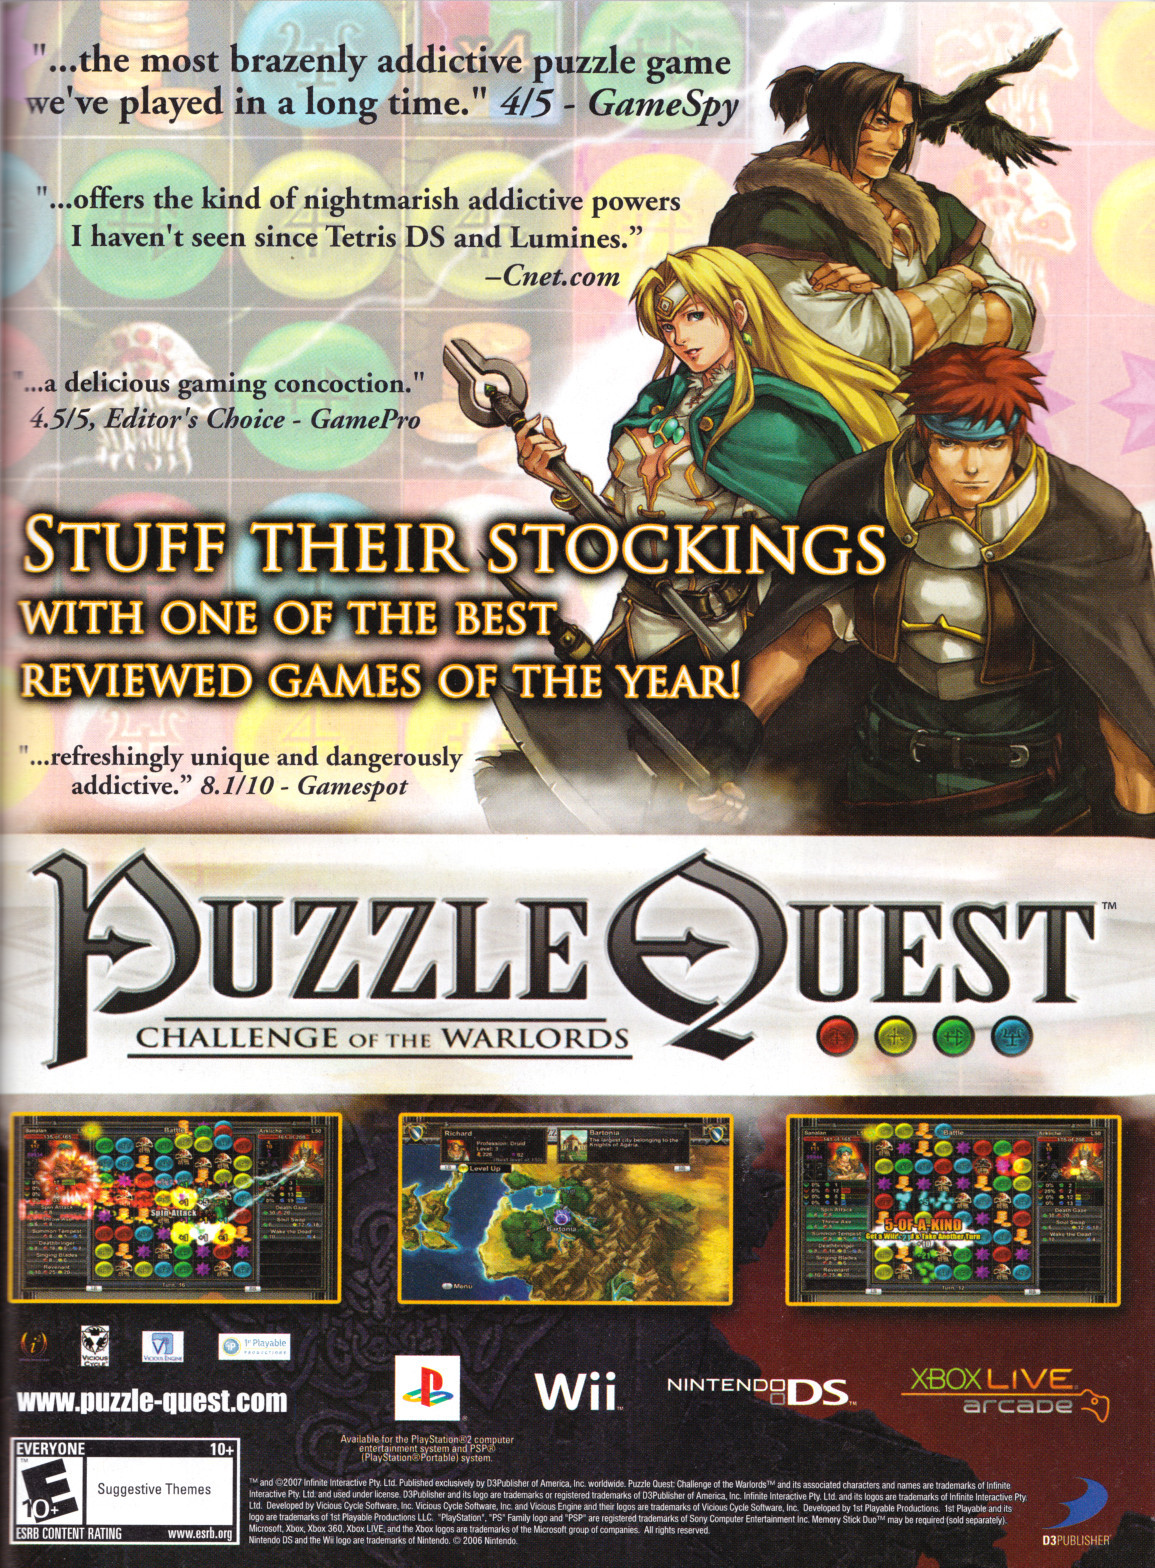 ‘Puzzle Quest: Challenge of the Warlords’[PS2 / PSP / WII / DS / XBLA]
[USA] [Magazine] [2007]
• Nintendo Power, Holiday 2007 (#223)